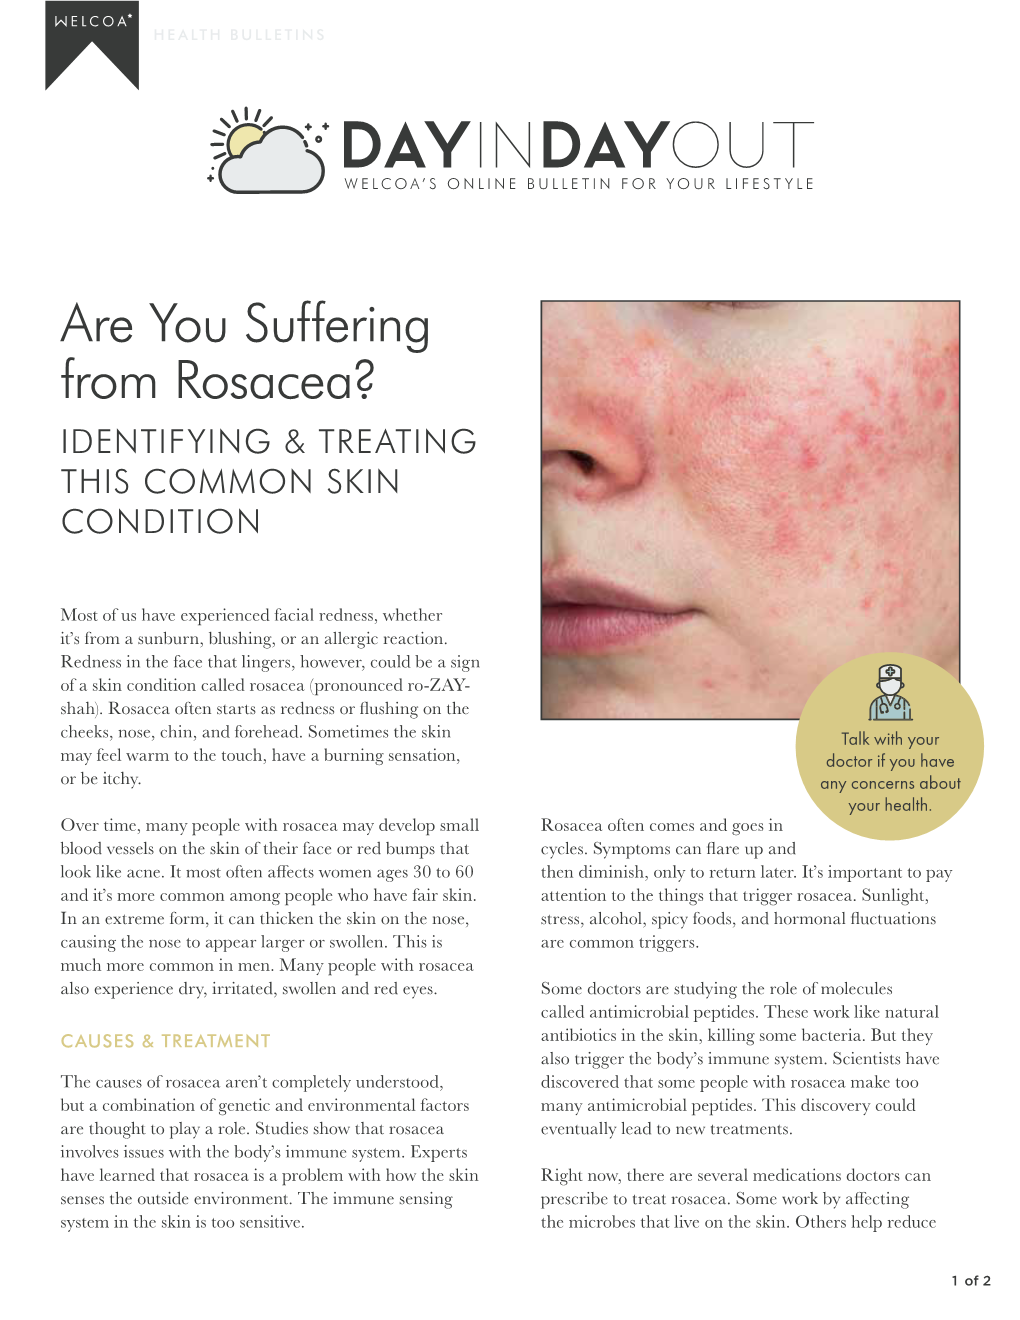 Are You Suffering from Rosacea? IDENTIFYING & TREATING THIS COMMON SKIN CONDITION